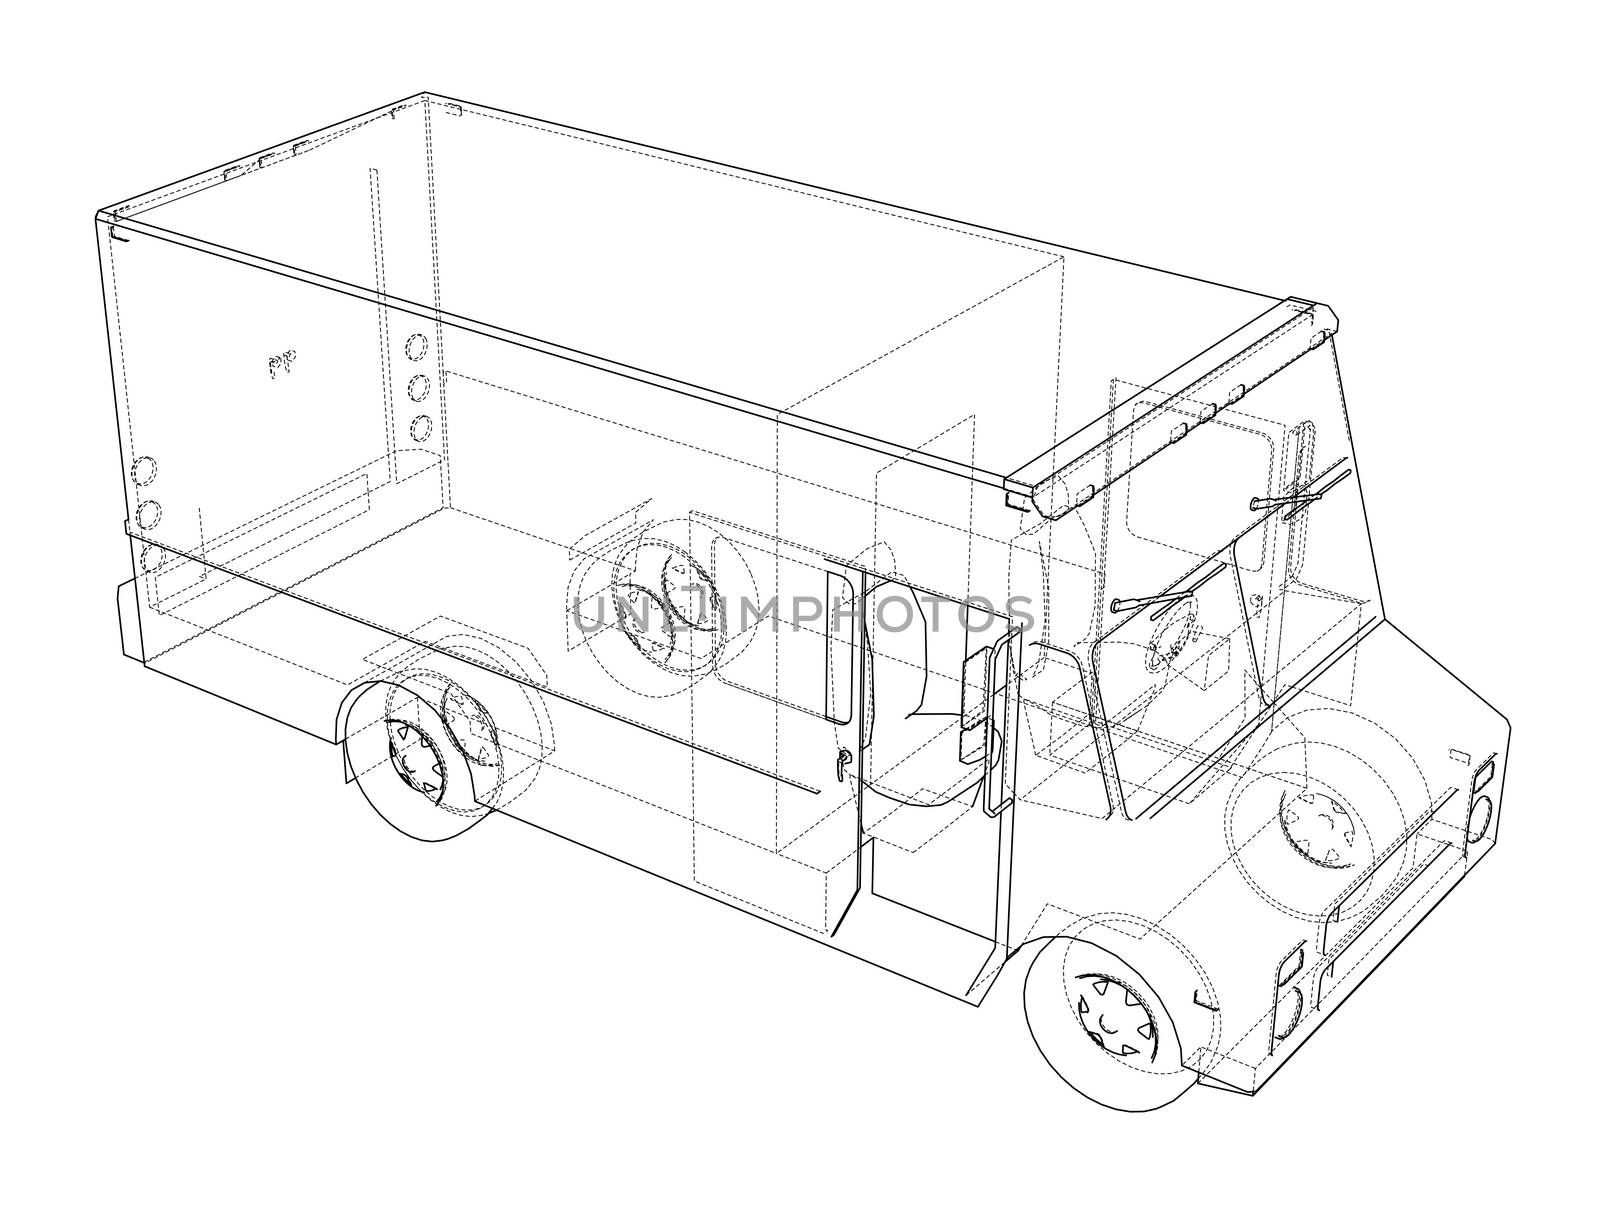 Concept delivery car. 3d illustration. Wire-frame style